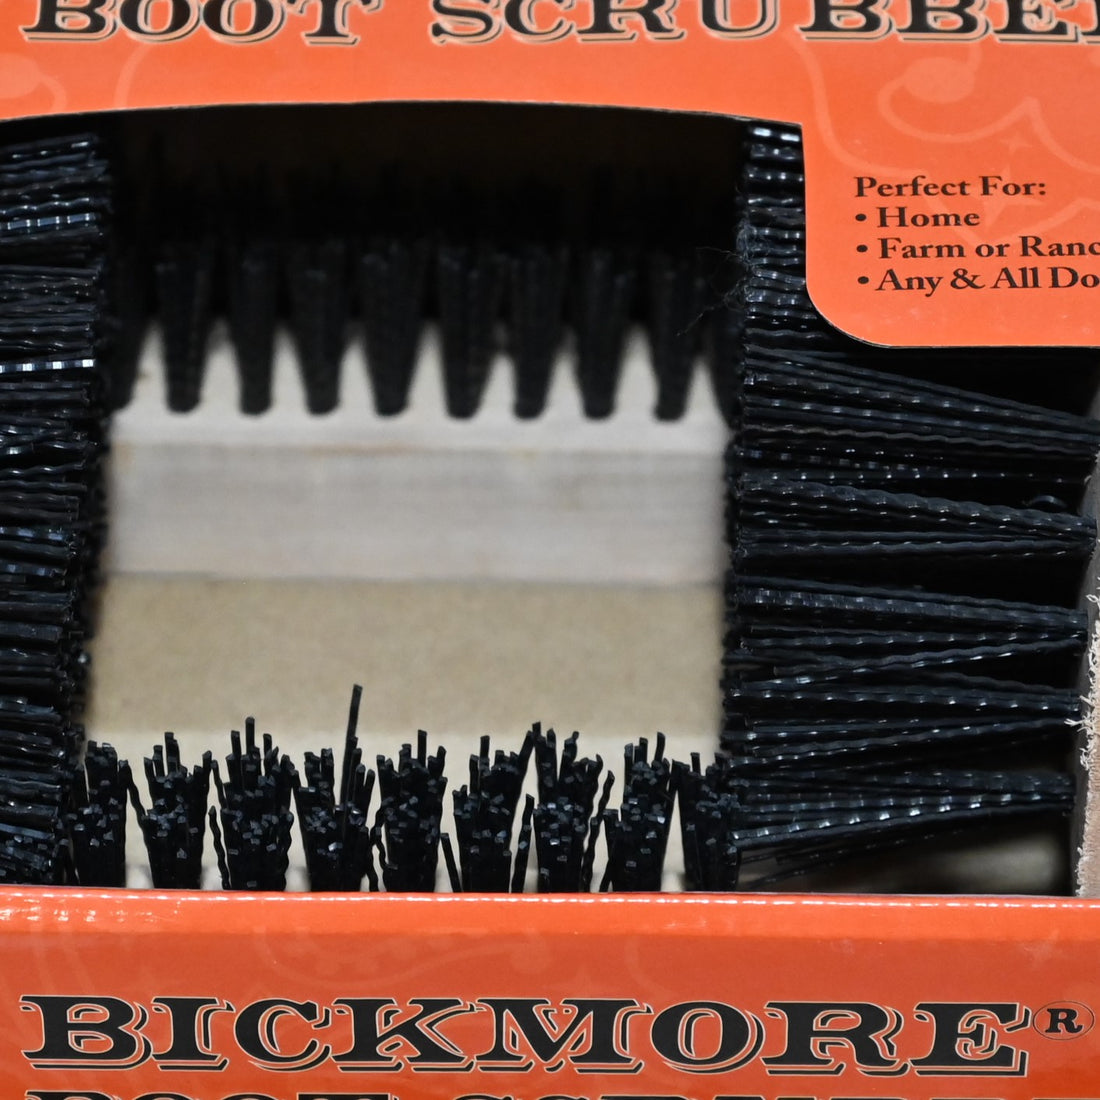 Bickmore Boot/Shoe Scrubber And Dirt Remover